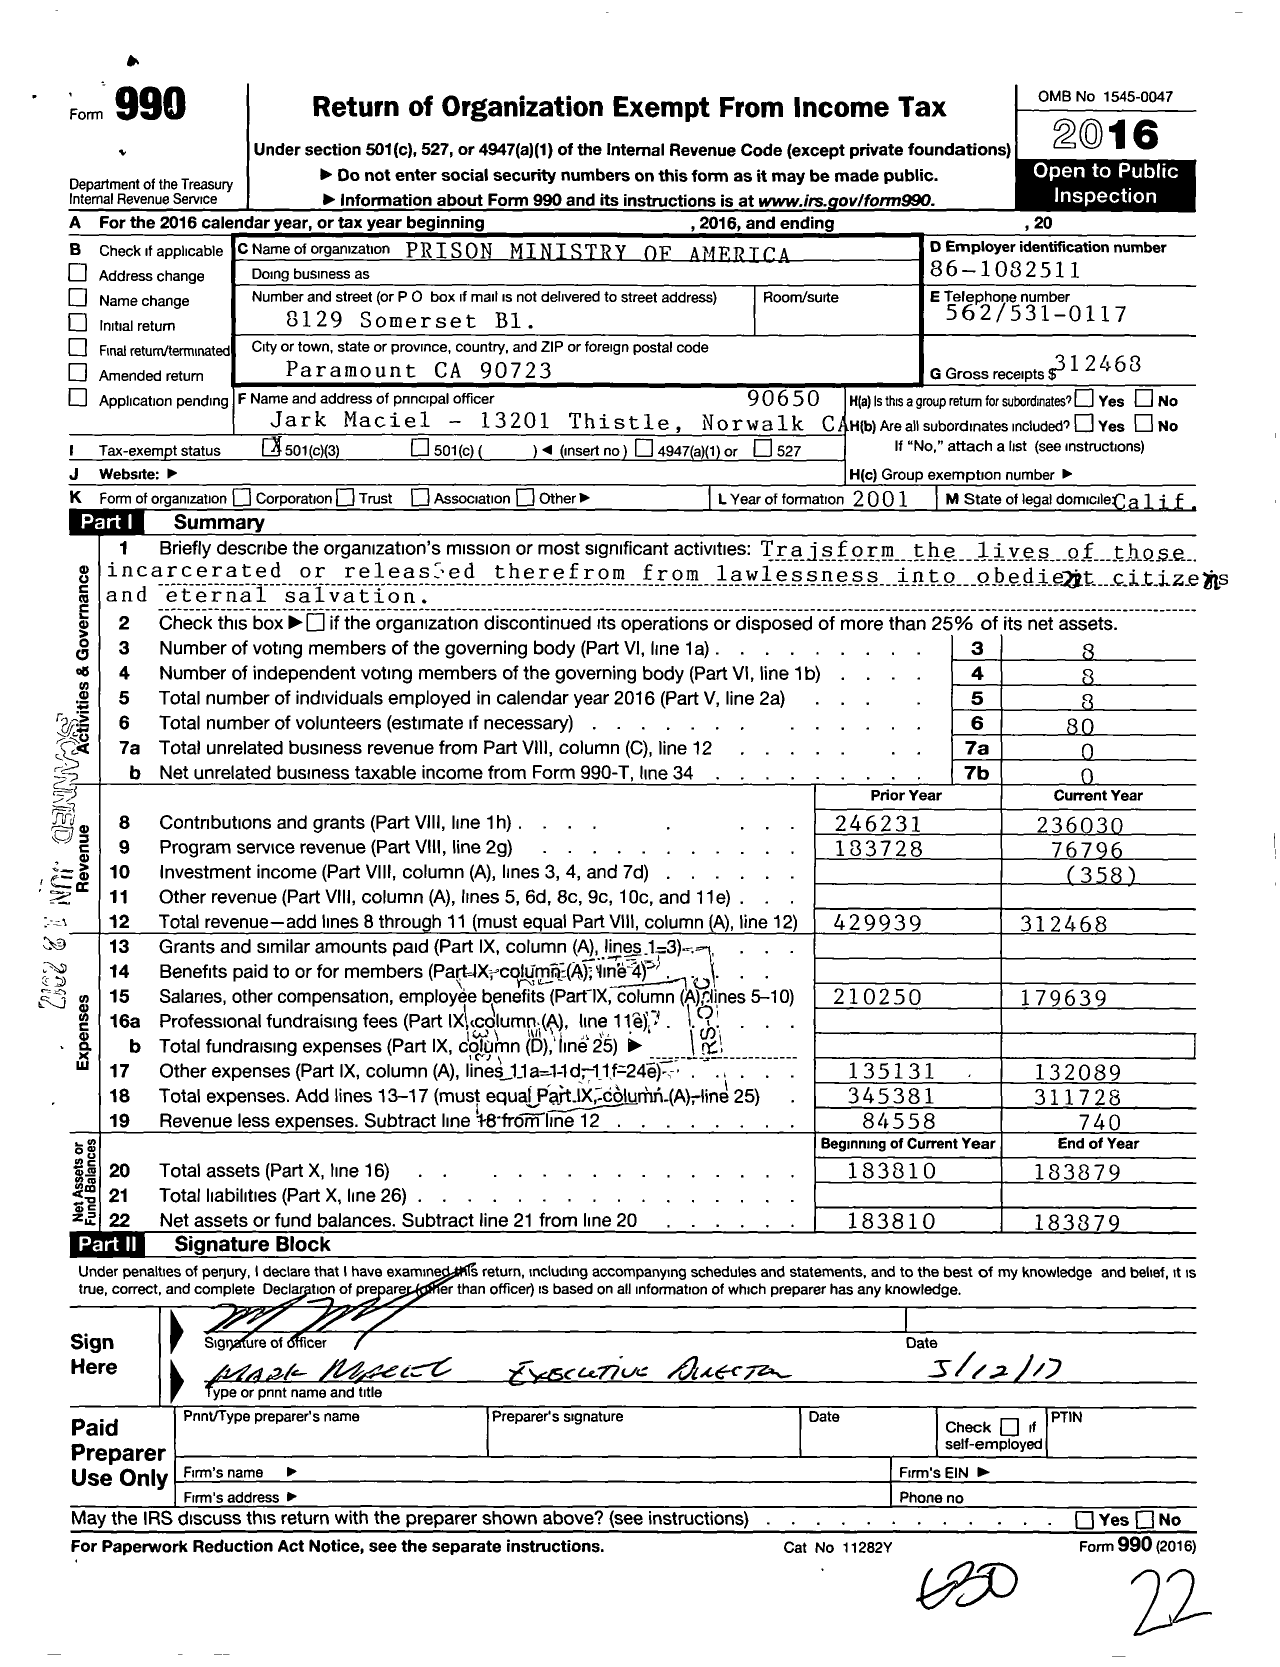 Image of first page of 2016 Form 990 for Prison Ministry of America (PMA)